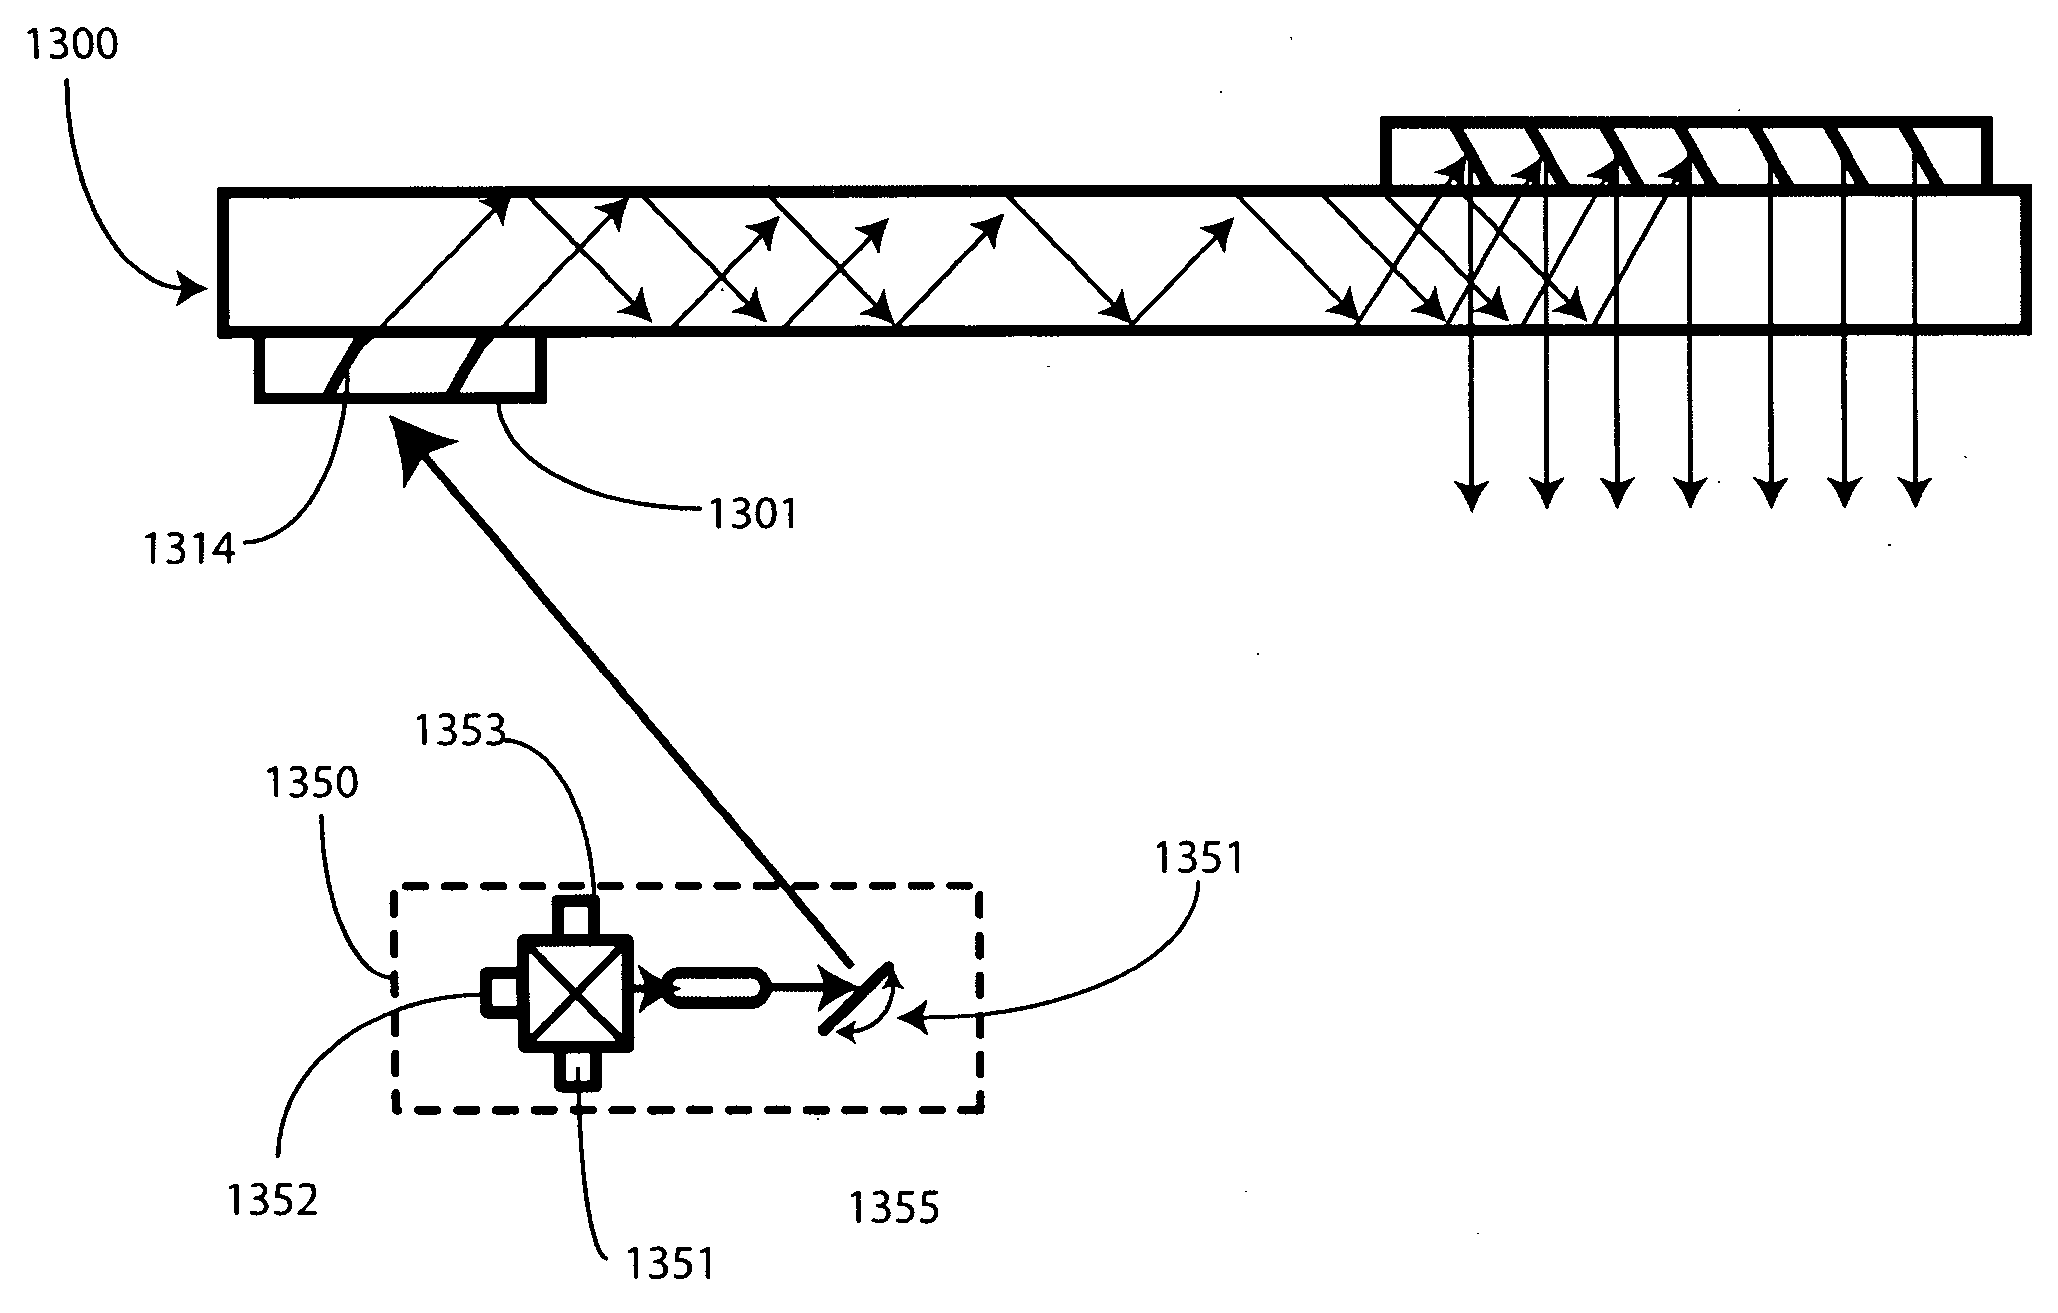 Substrate Guided Relay with Pupil Expanding Input Coupler